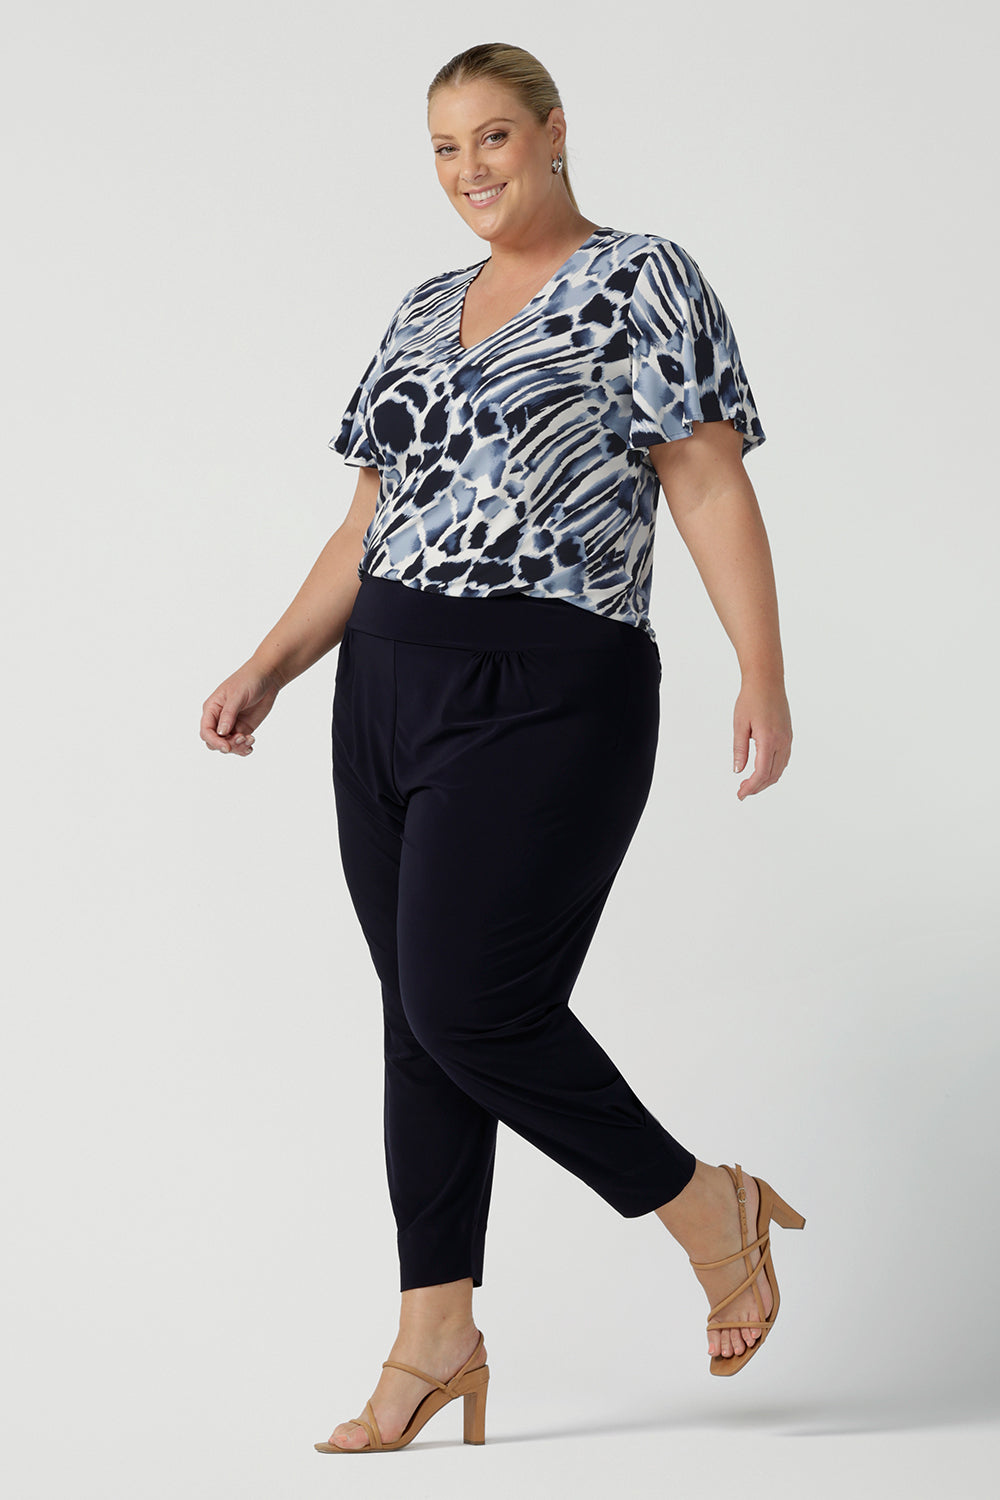 A plus size, size 18 woman wears a blue and white print jersey, V-neck top with flutter sleeves and tapered leg, dropped crotch, navy blue travel pants. A good top for summer casual wear or as a workwear top this quality women's top is made in Australia. Shop made in Australia tops in petite to plus sizes online at Australian fashion brand, Leina & Fleur.